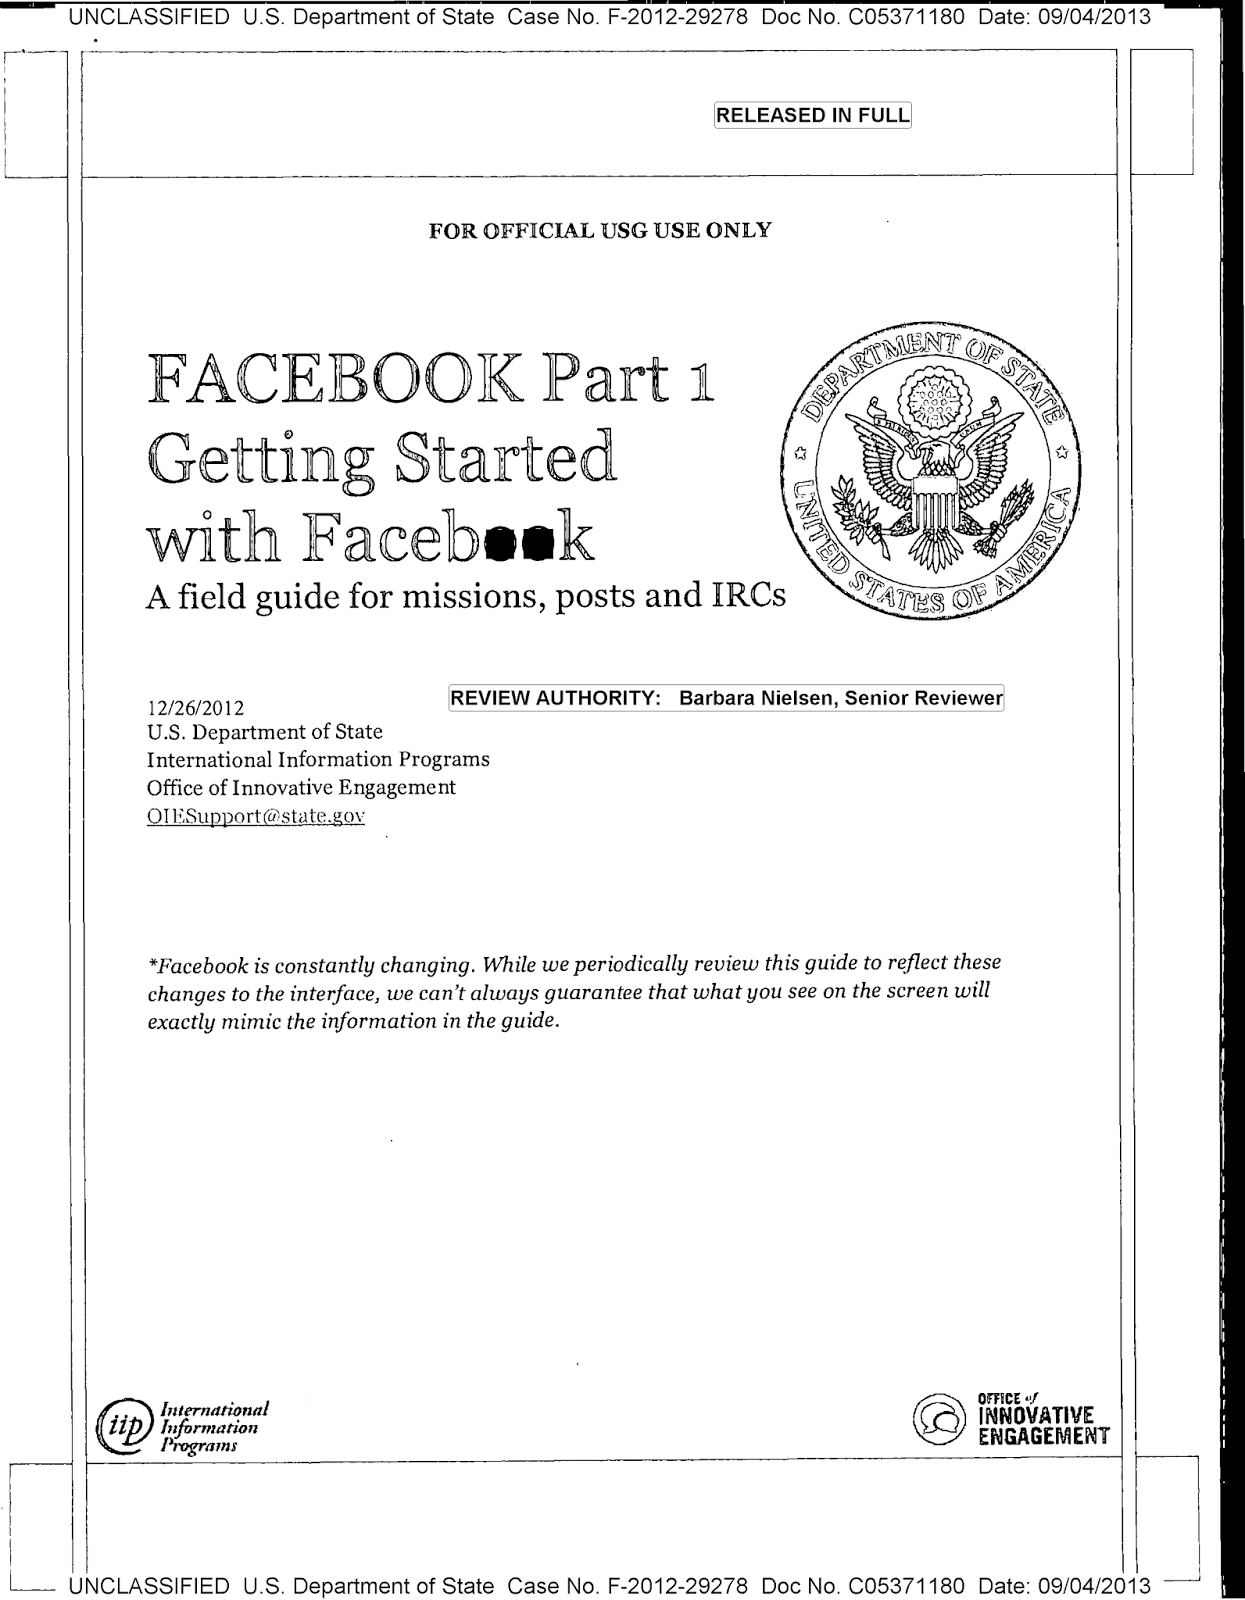 Department of State. Facebook Part 1: Getting Started with Facebook - A field guide for missions, posts and IRCs. International Information Programs, Office of Innovative Engagement, Dec. 26, 2012. Judicial Watch v. U.S. State Department, Doc. No. C05371180, Case No. F-2012-29278, 09/04/2013 (This first numbered document in the four-part series is nonsensically the last dated item).